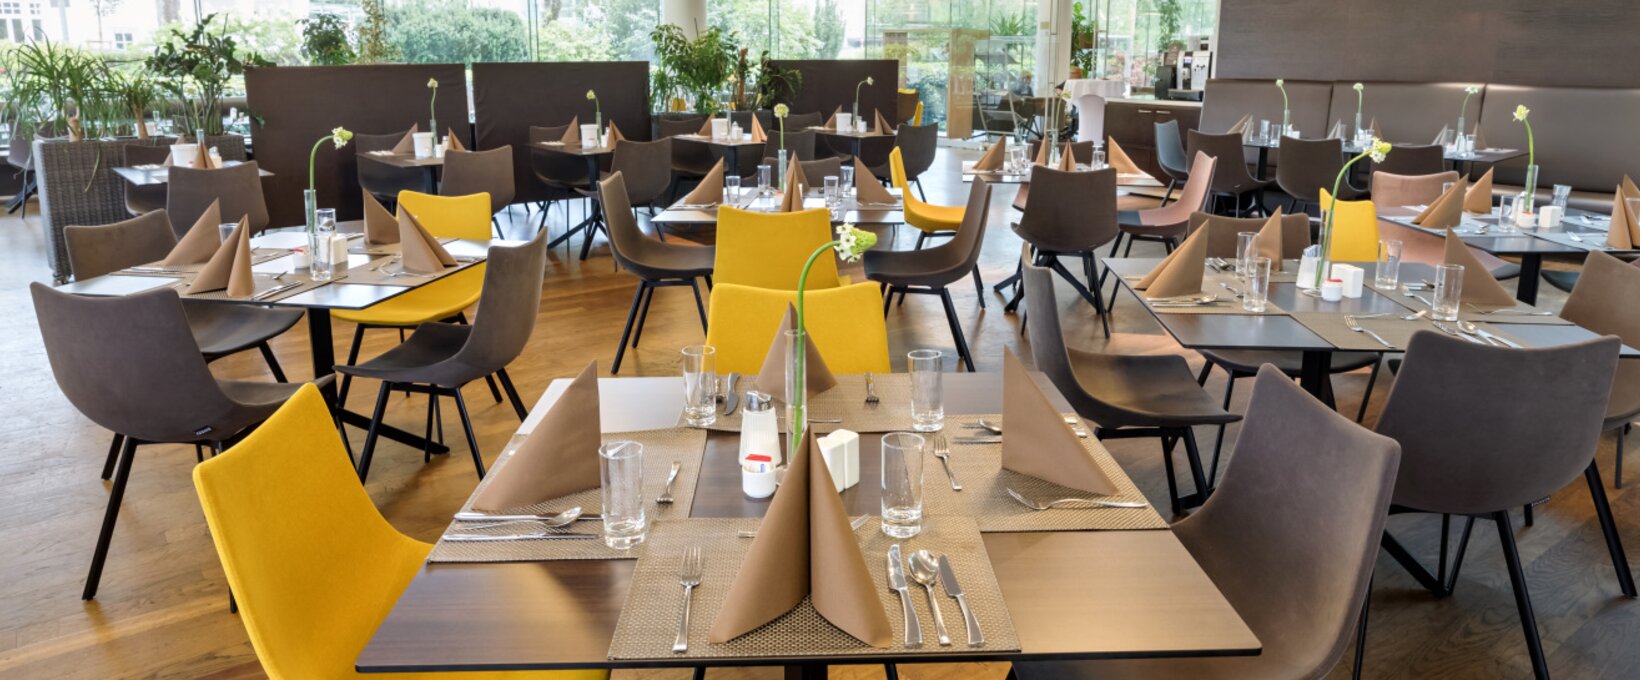 Restaurant with laid table | Hotel Congress Innsbruck